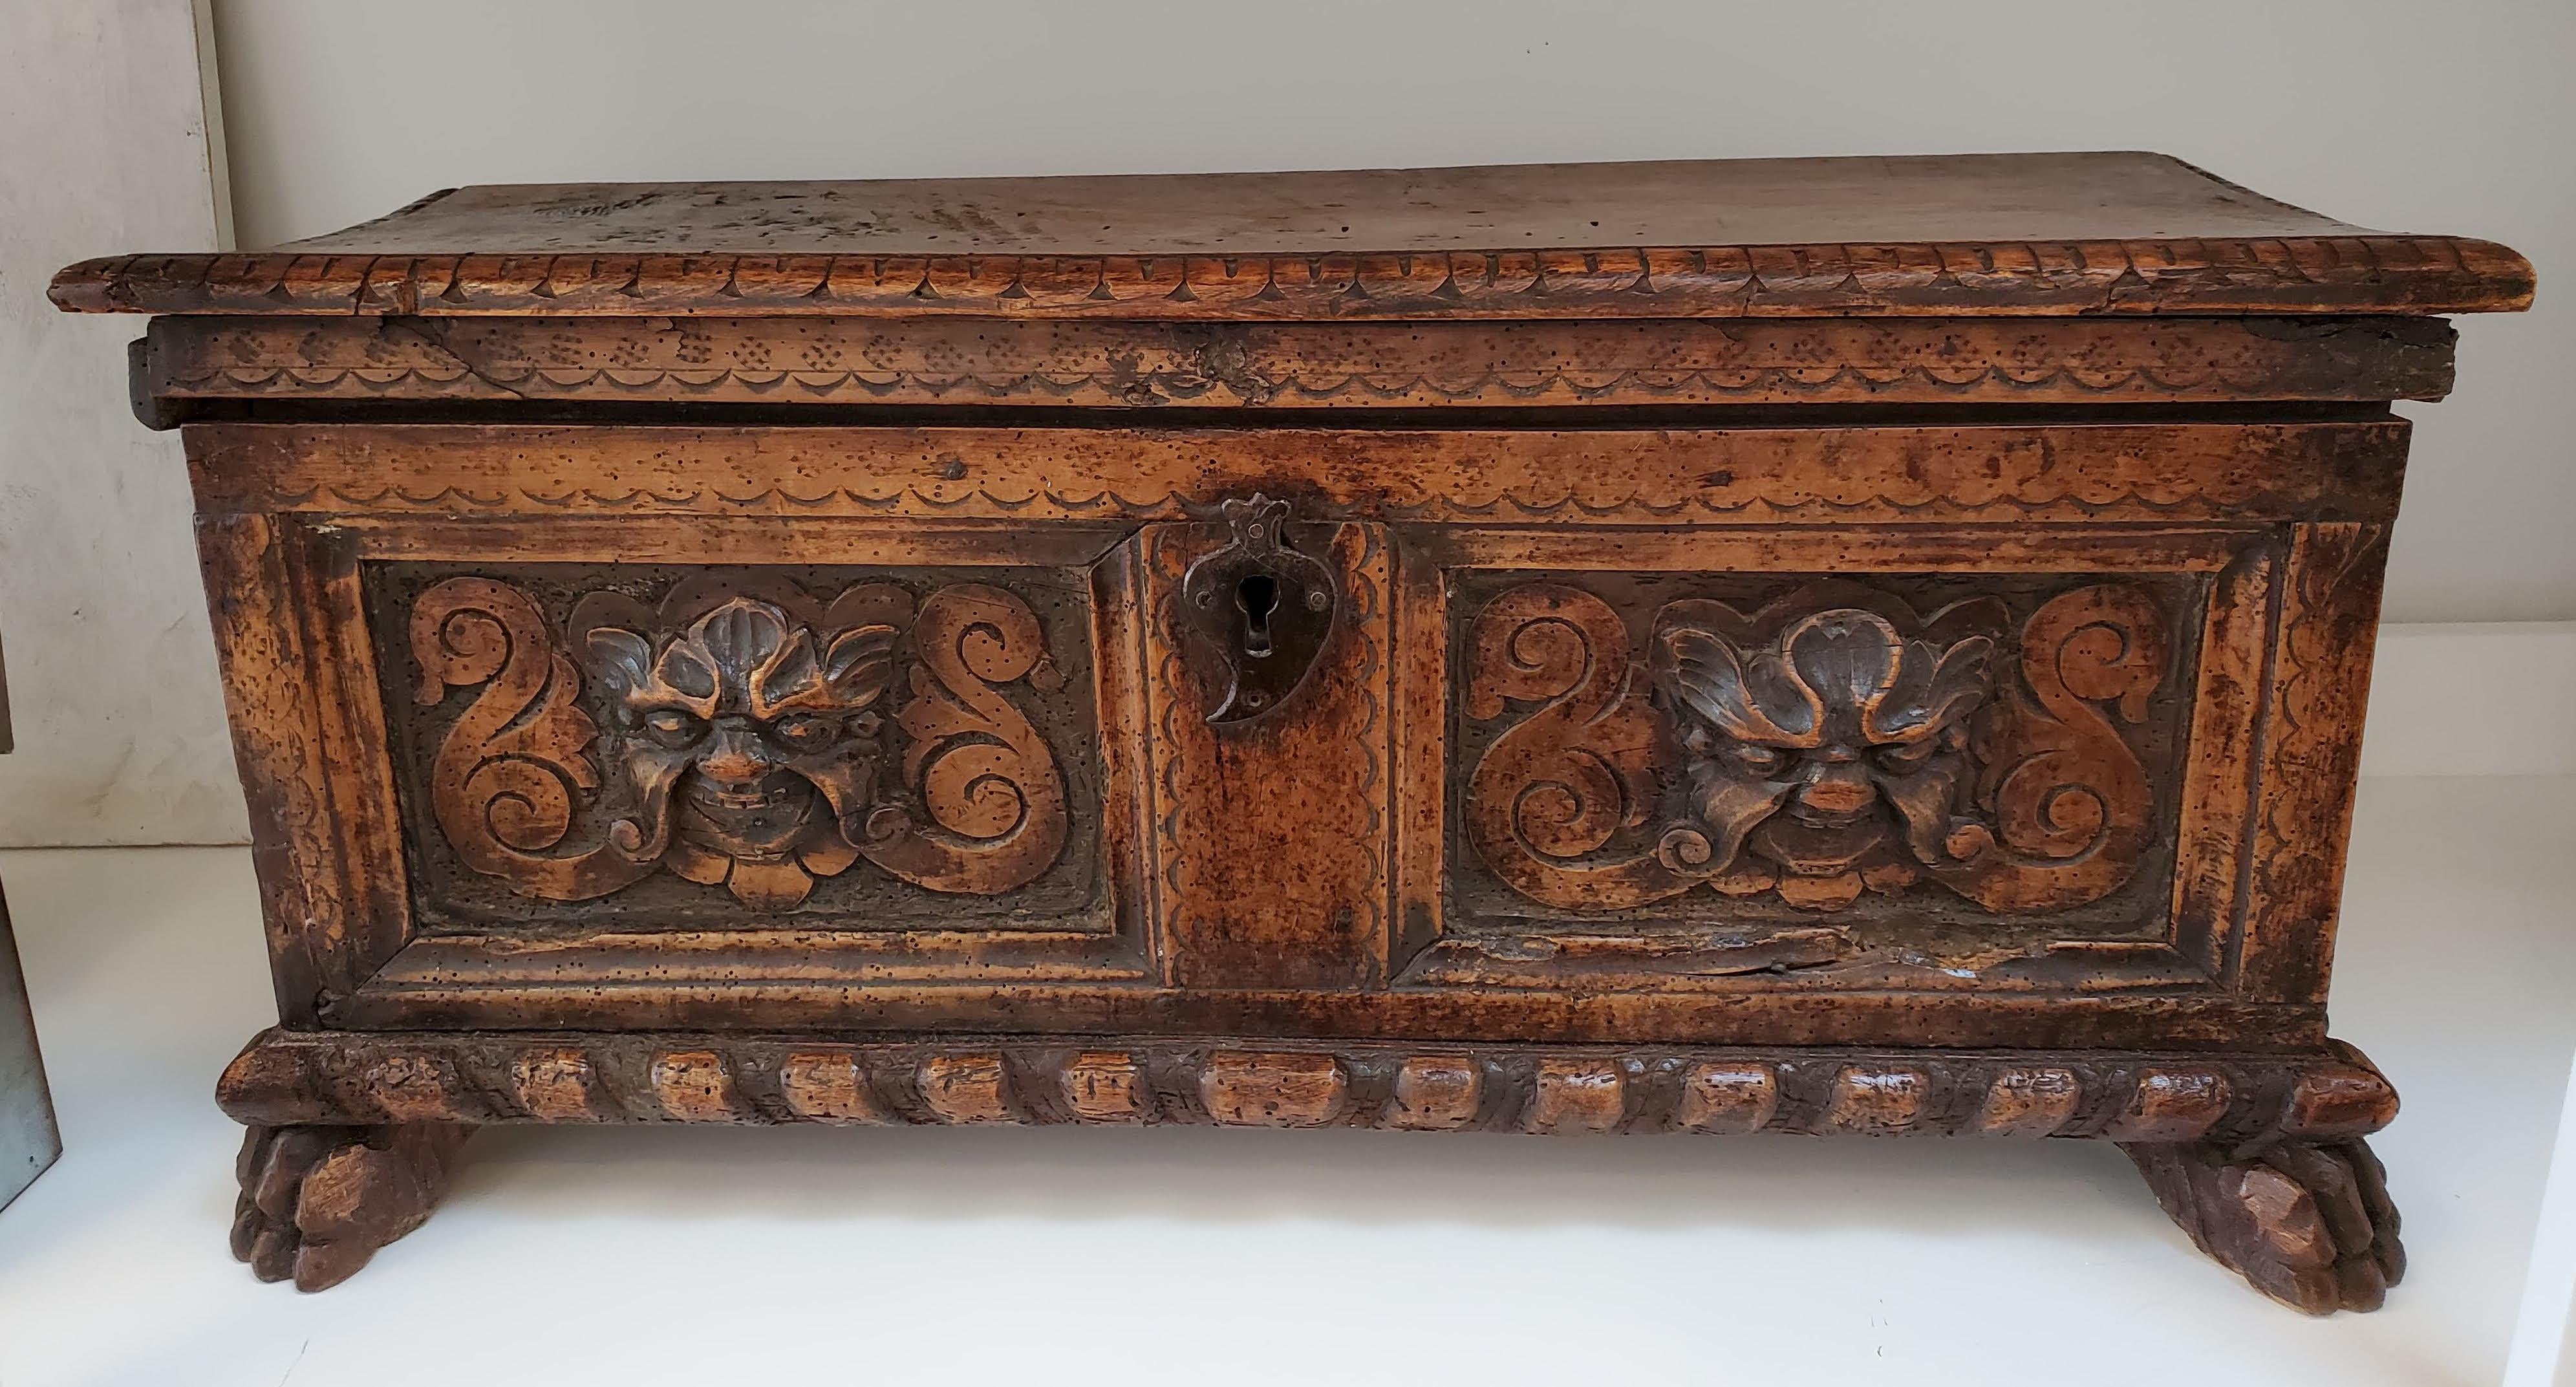 The beautiful 16th century Italian renaissance cassone or marriage box with its rare small size will make a lovely addition to your decor. With two carved panels with mask decoration above molded base and carved claw feet, this piece has many